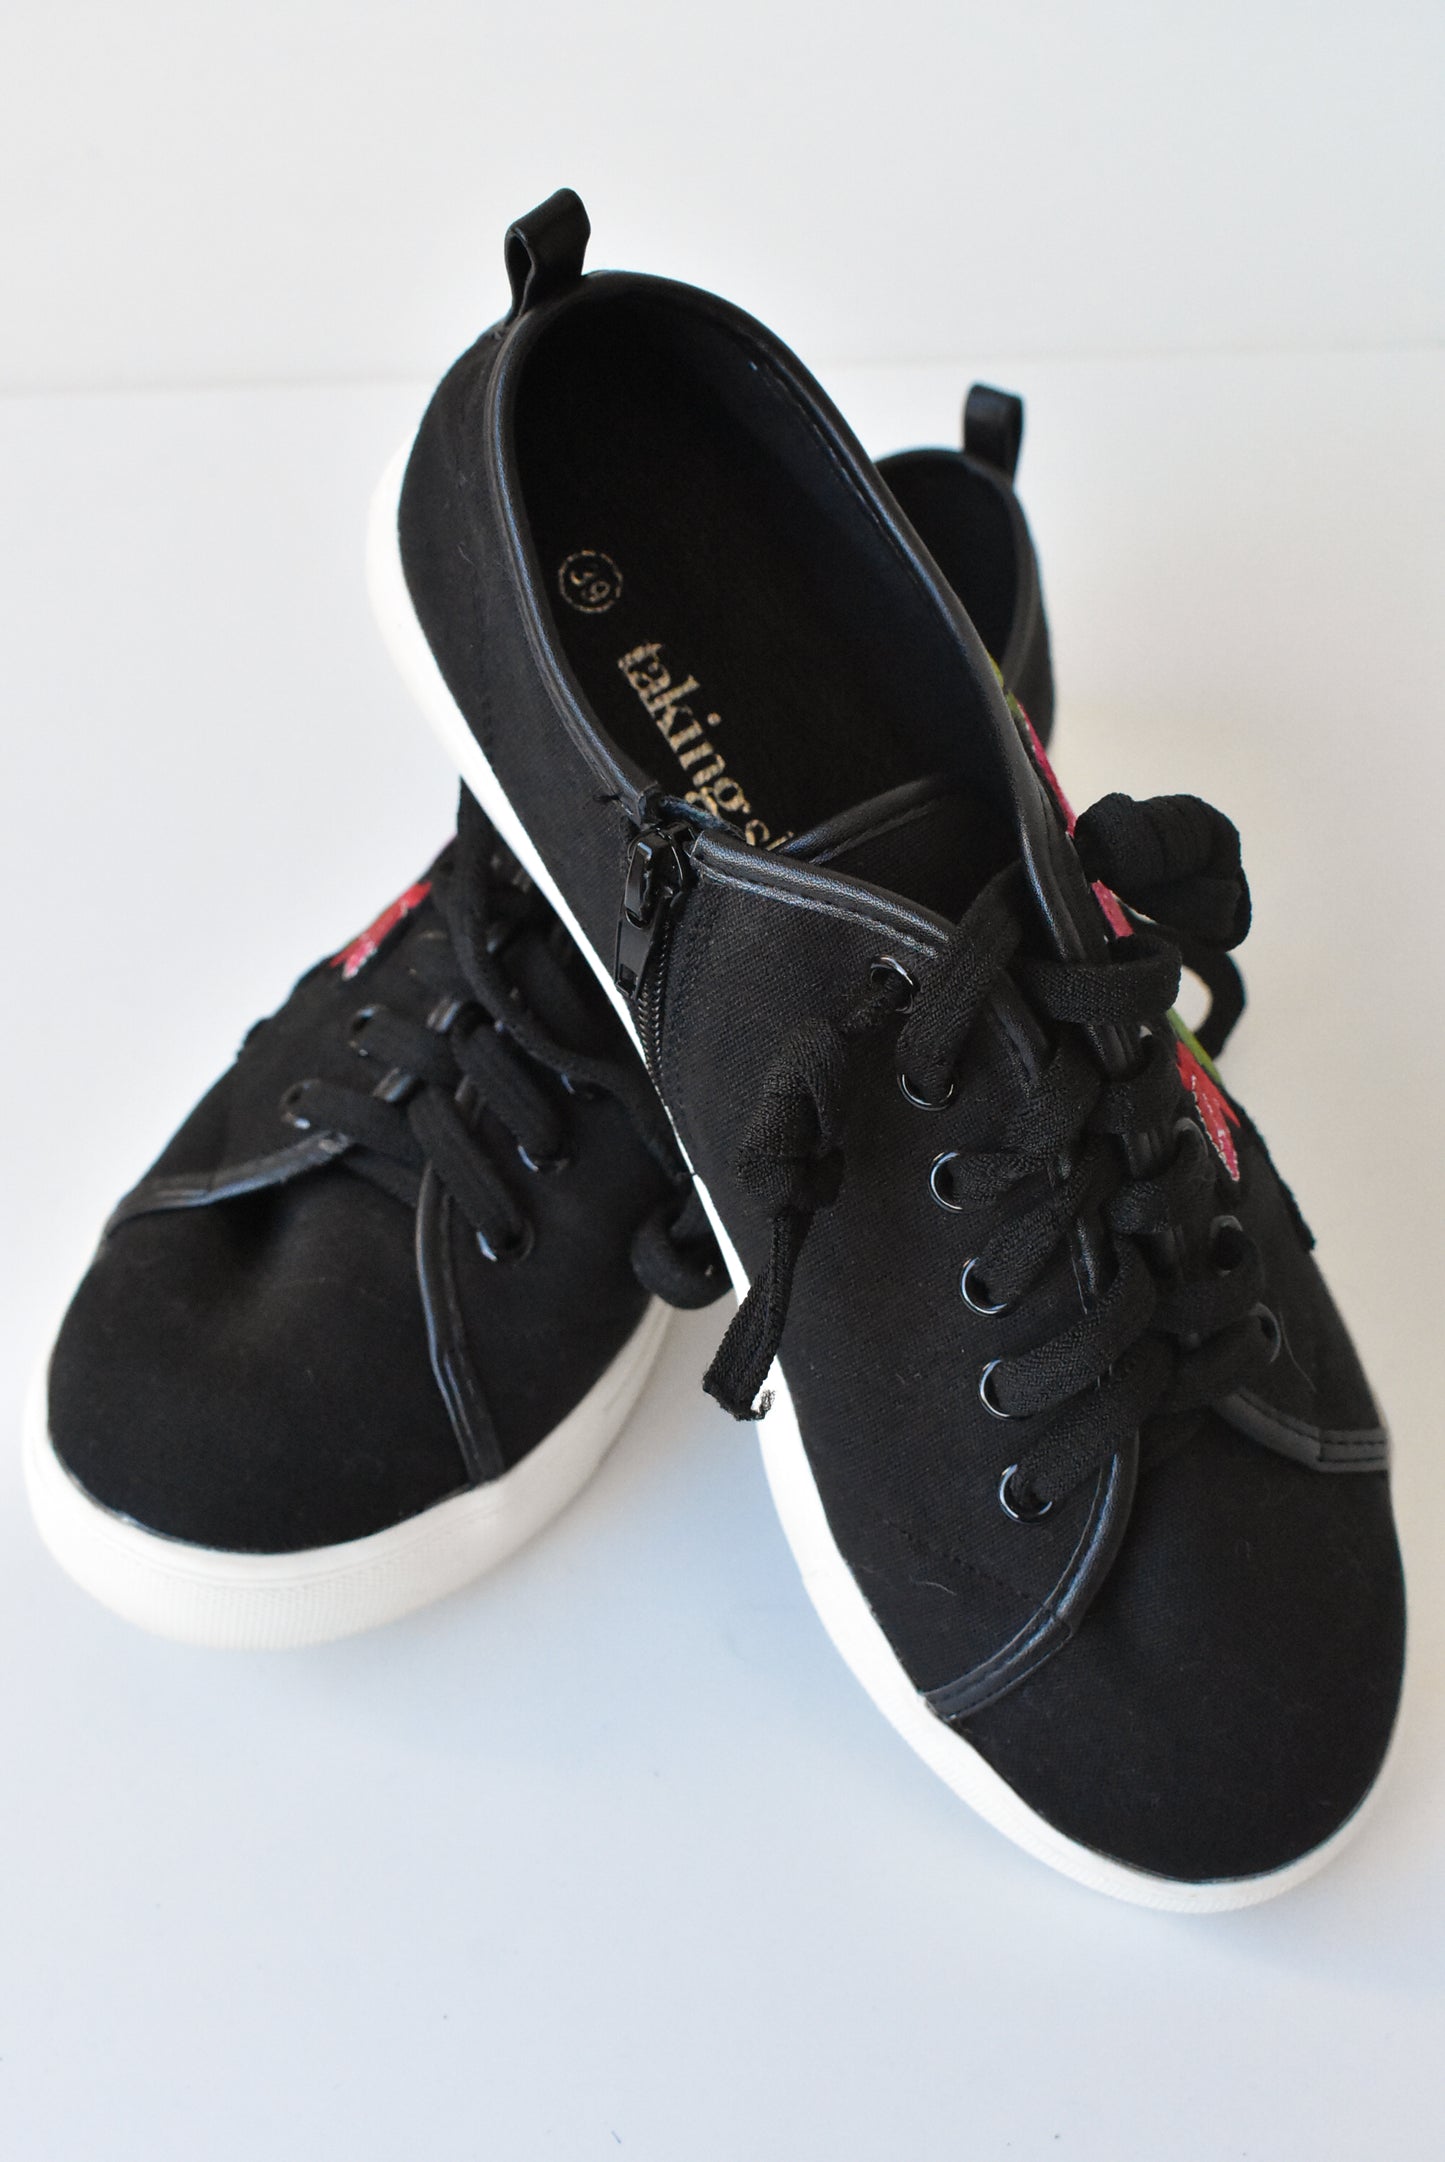 Taking Shape embroidered leather lined sneaks, NWT, 39